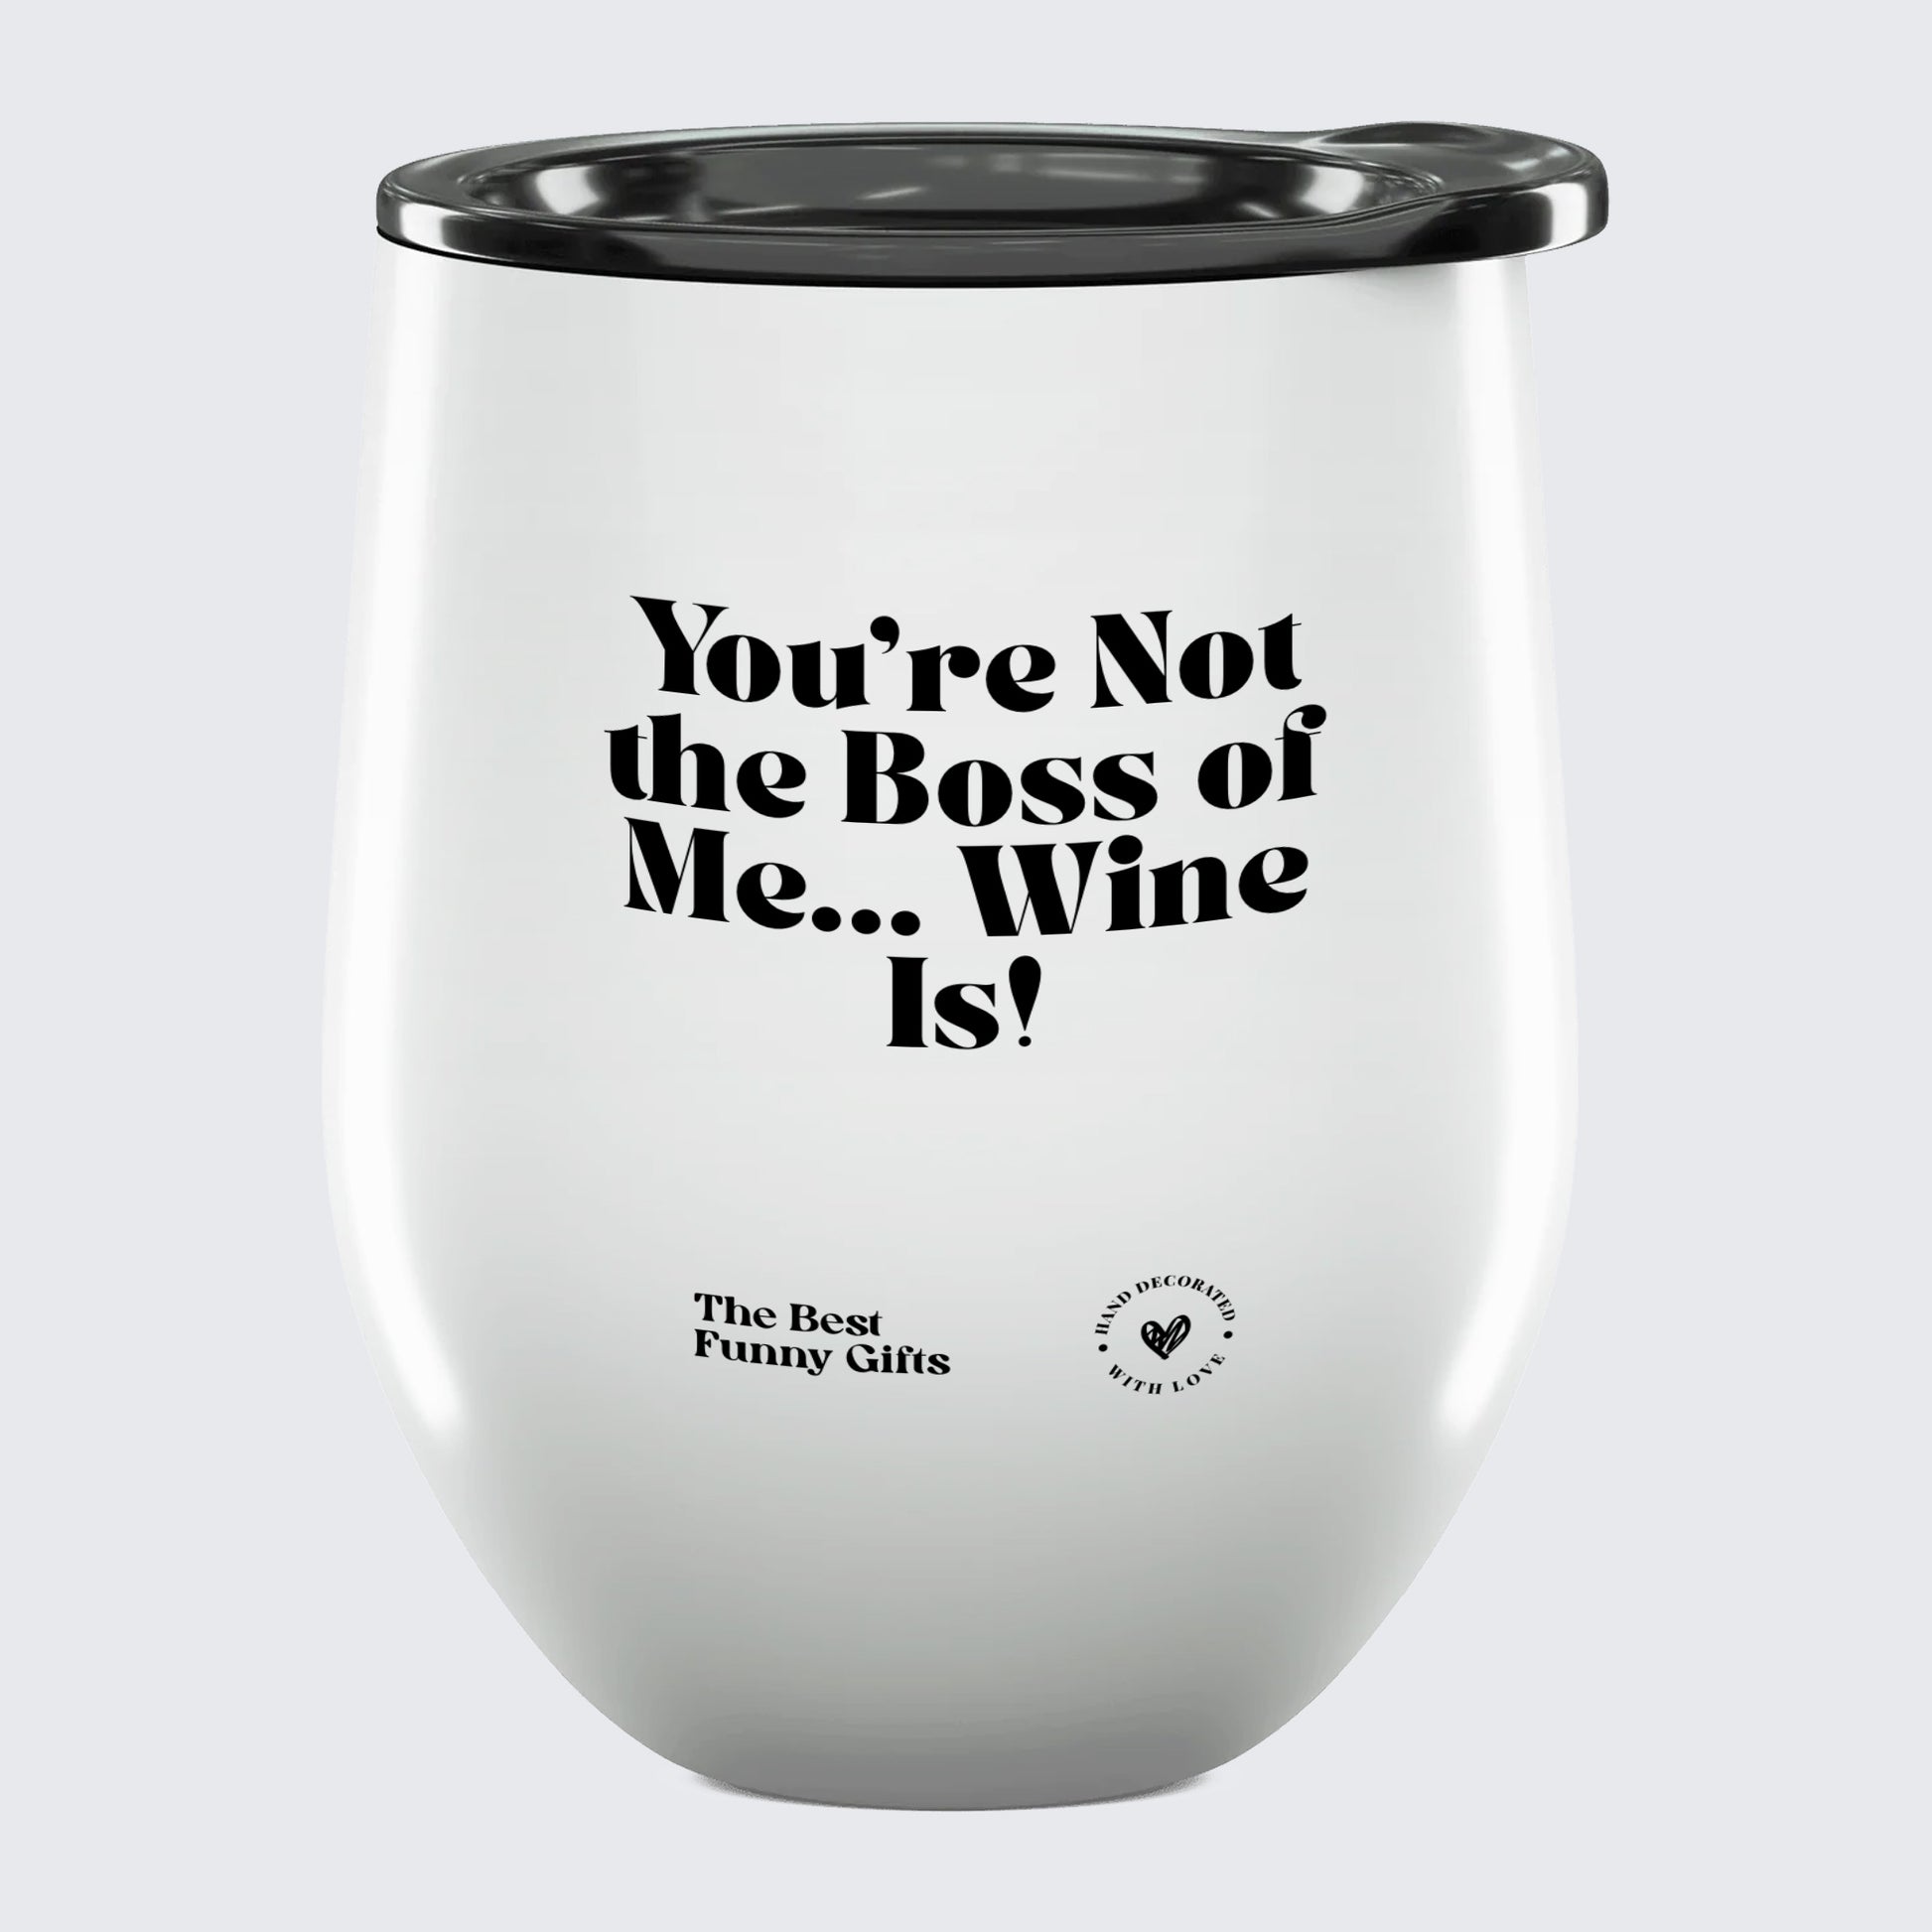 Wine Tumbler You're Not the Boss of Me... Wine is! - The Best Funny Gifts